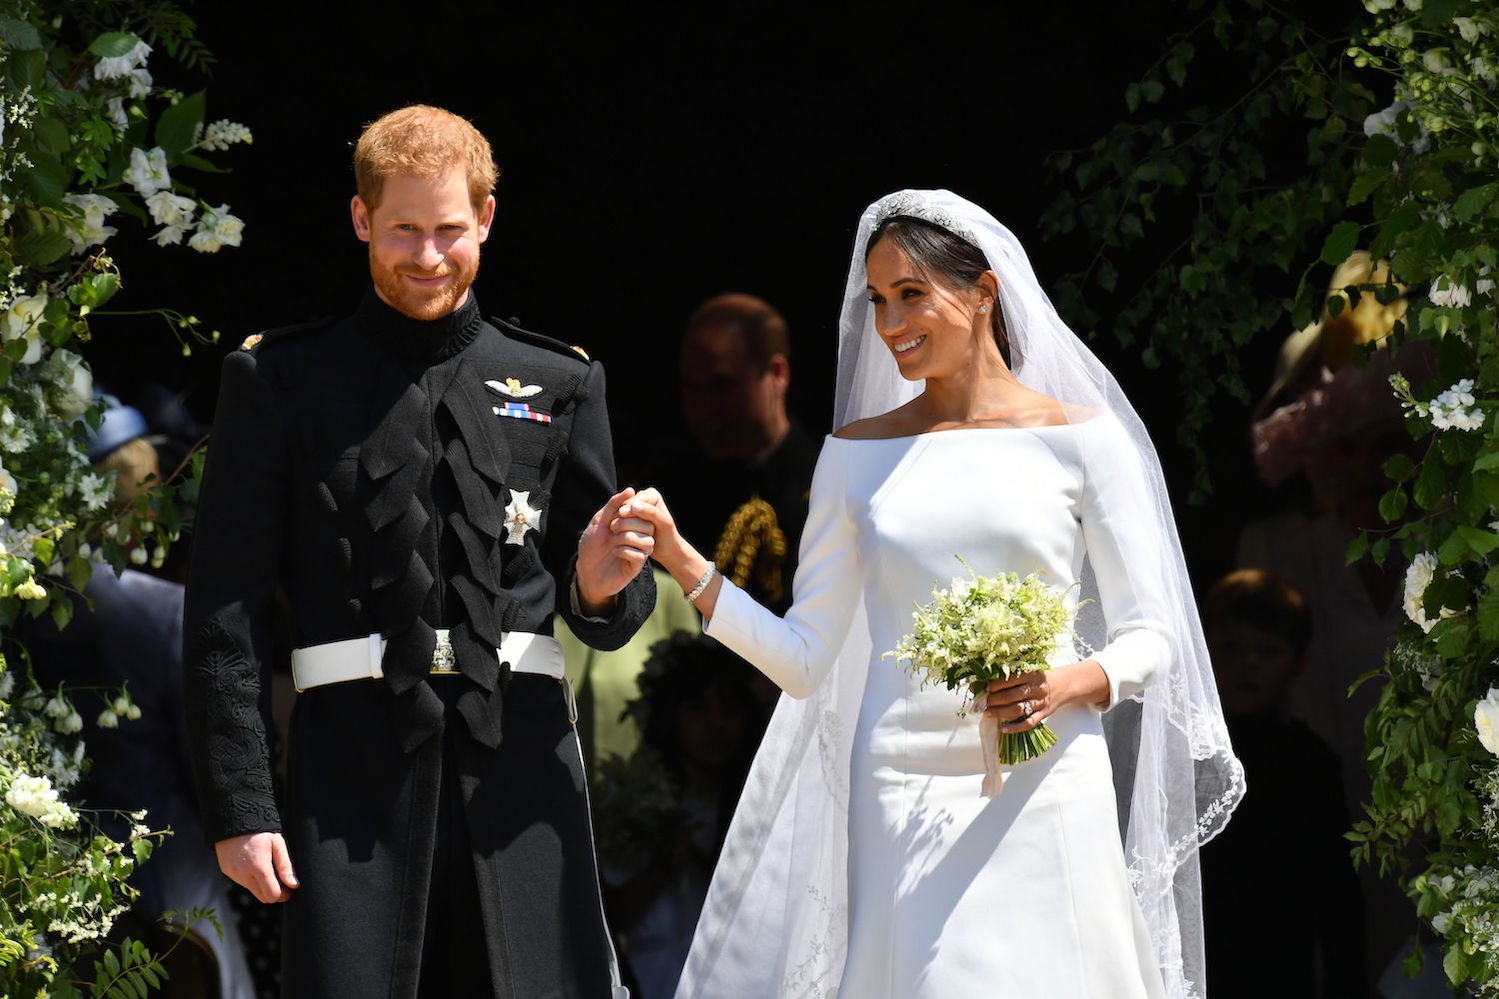 Prince Harry and Meghan Markle come out the West Door of St George's Chapel, Windsor Castle after their wedding ceremony